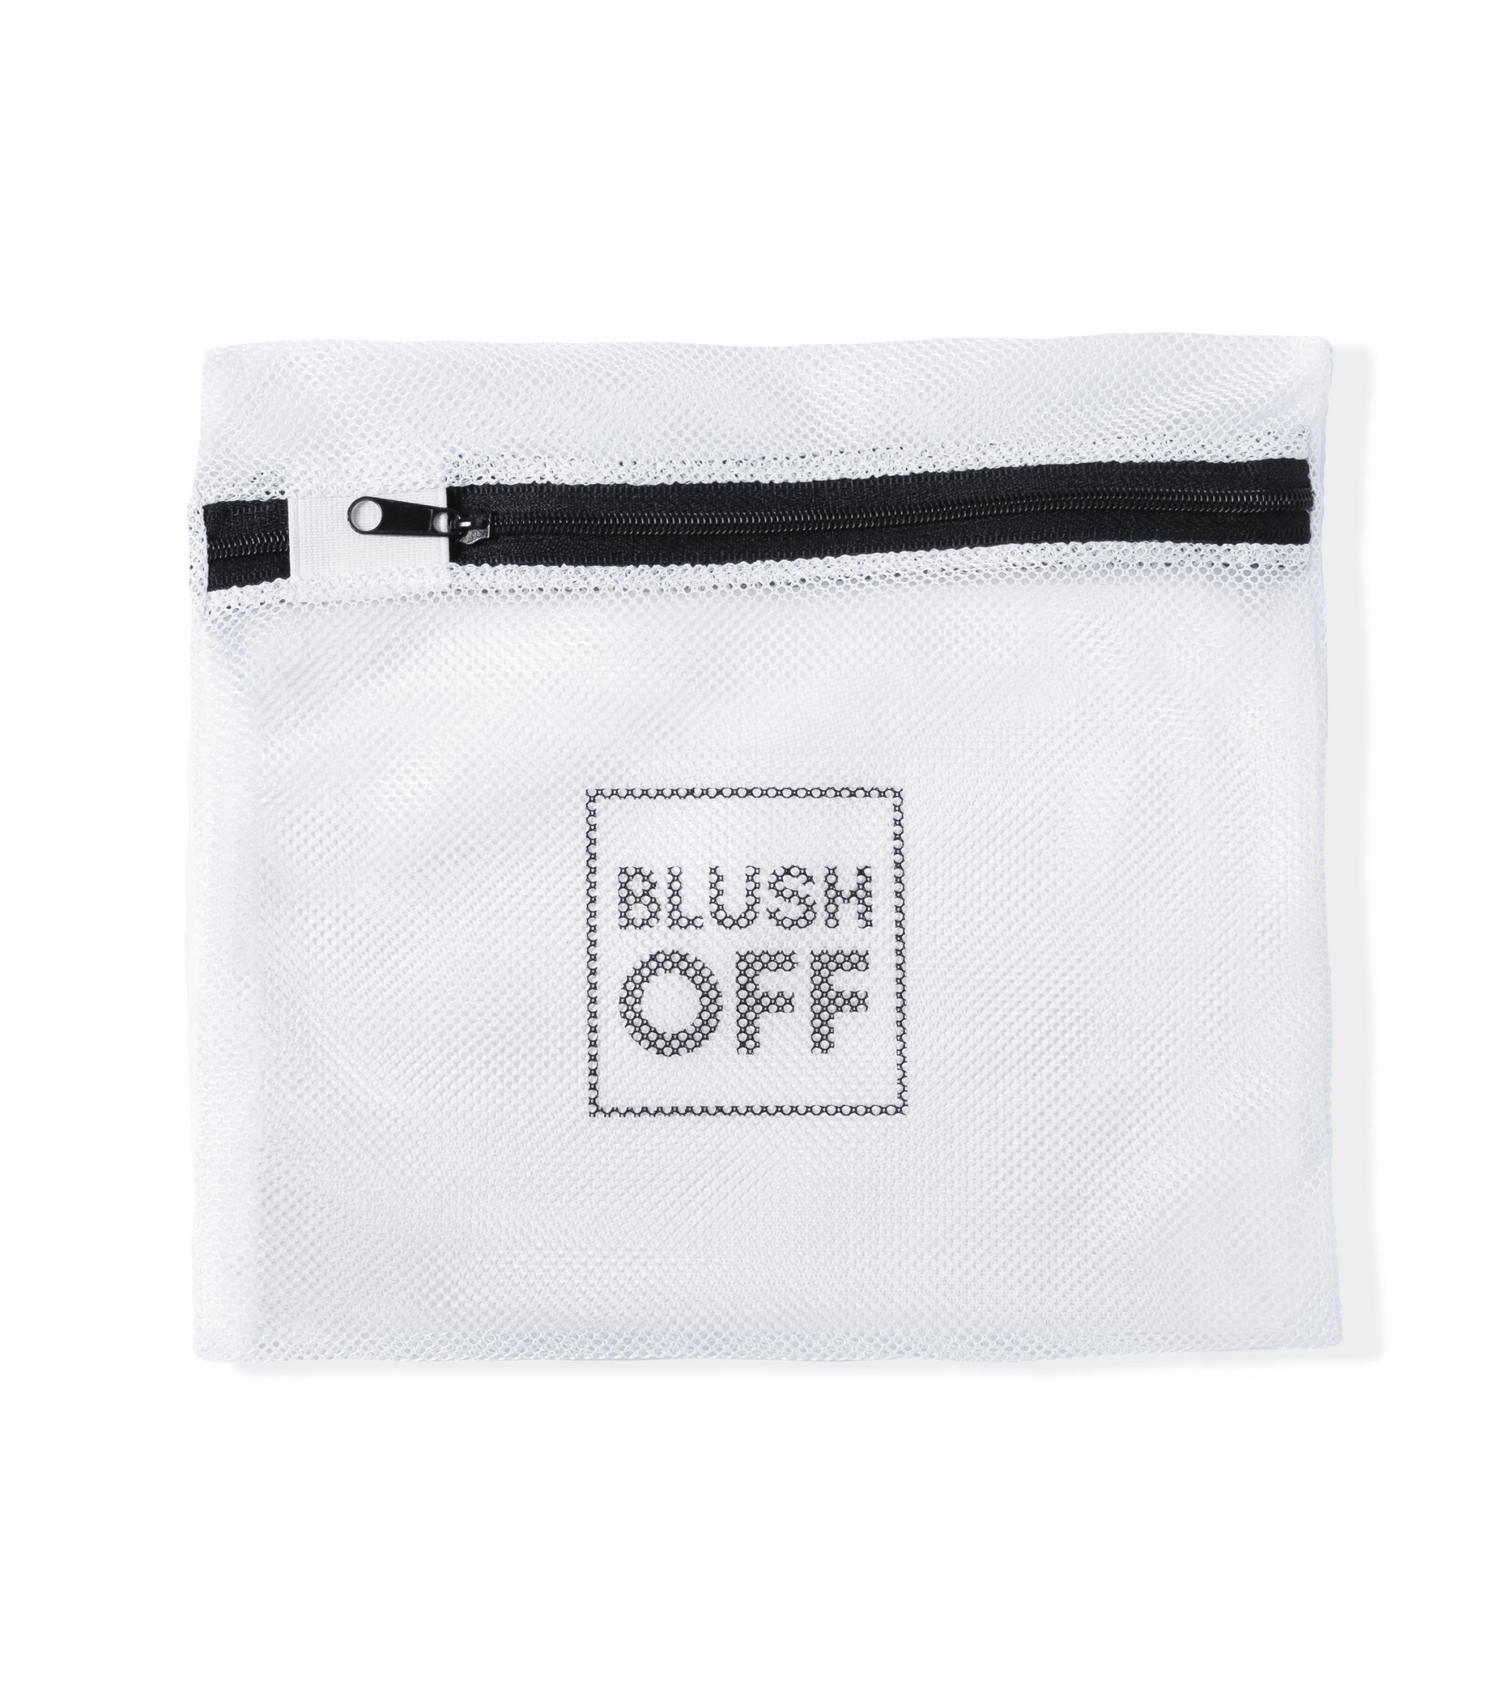 Laundry Wash Bag - Blush Off - Eco Friendly Makeup Remover - FREE EXPRESS SHIPPING  